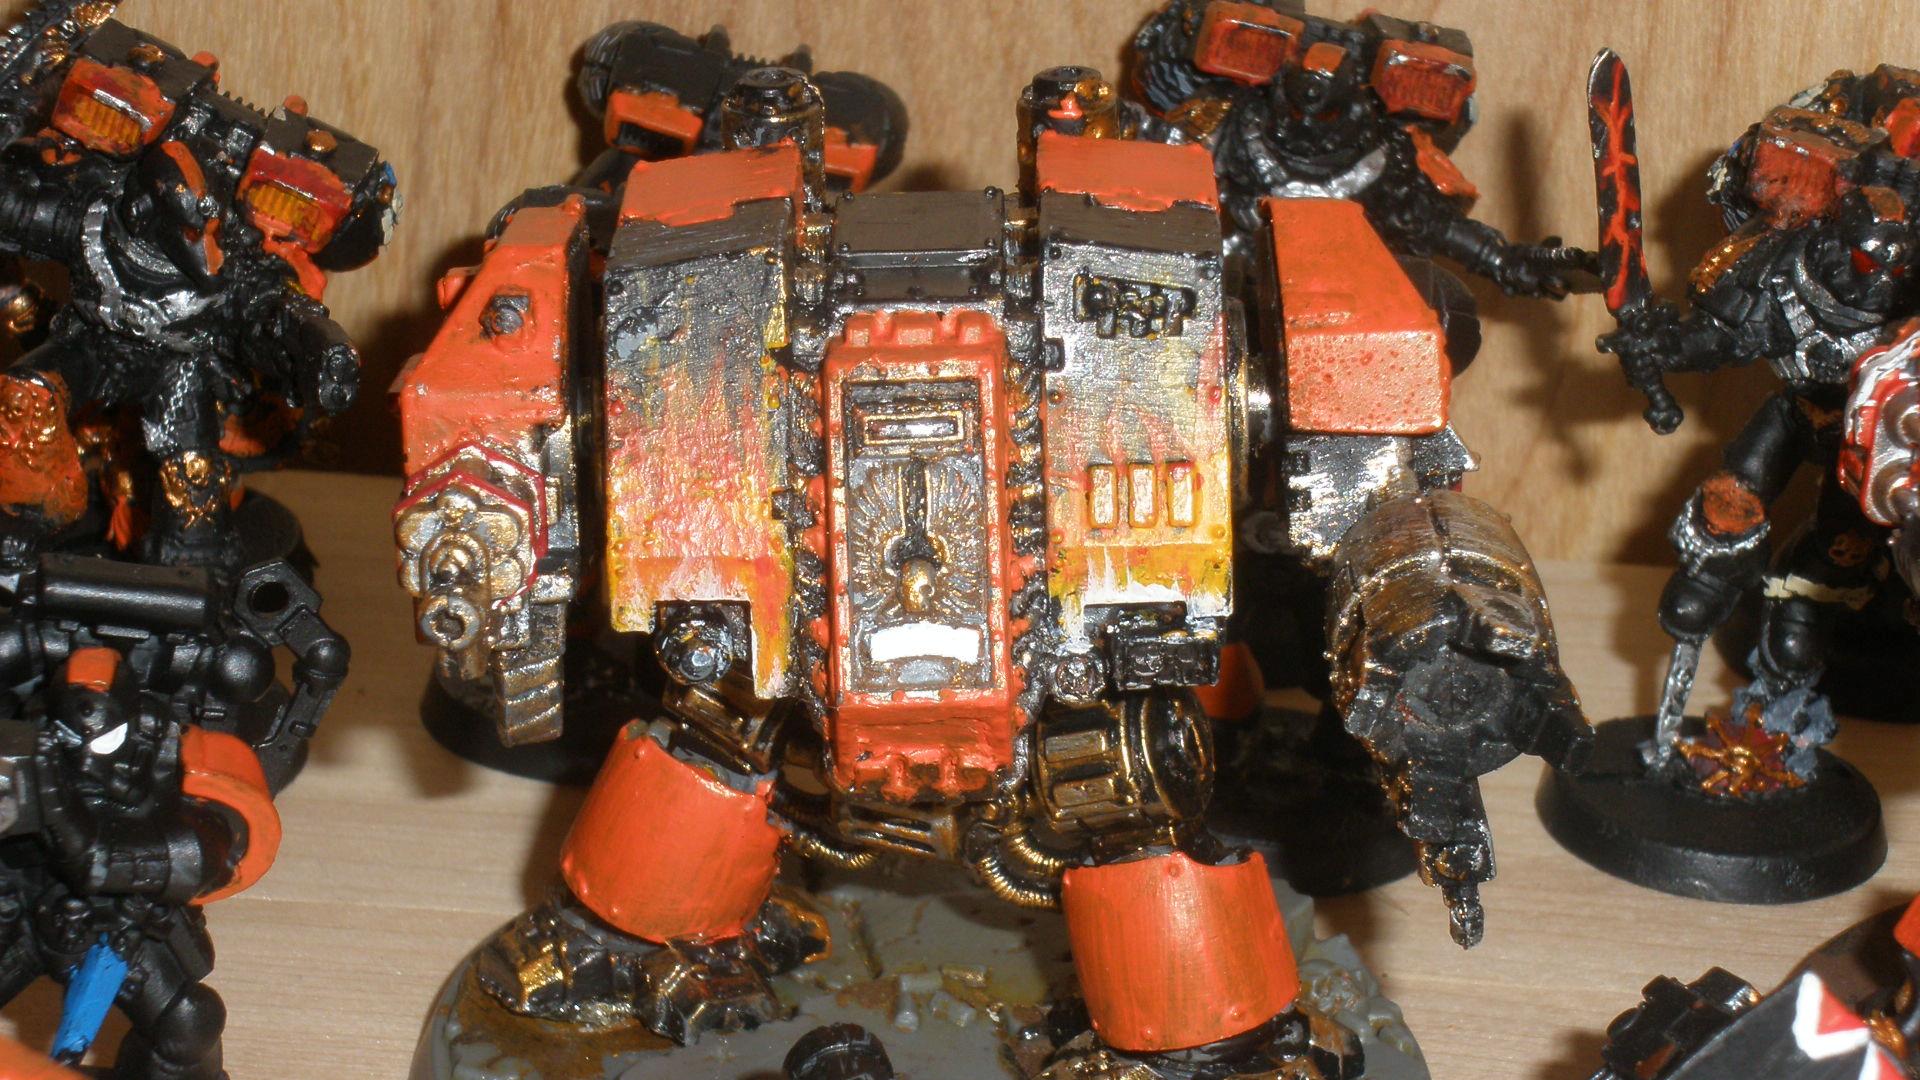 Dreadnought, Space Marines